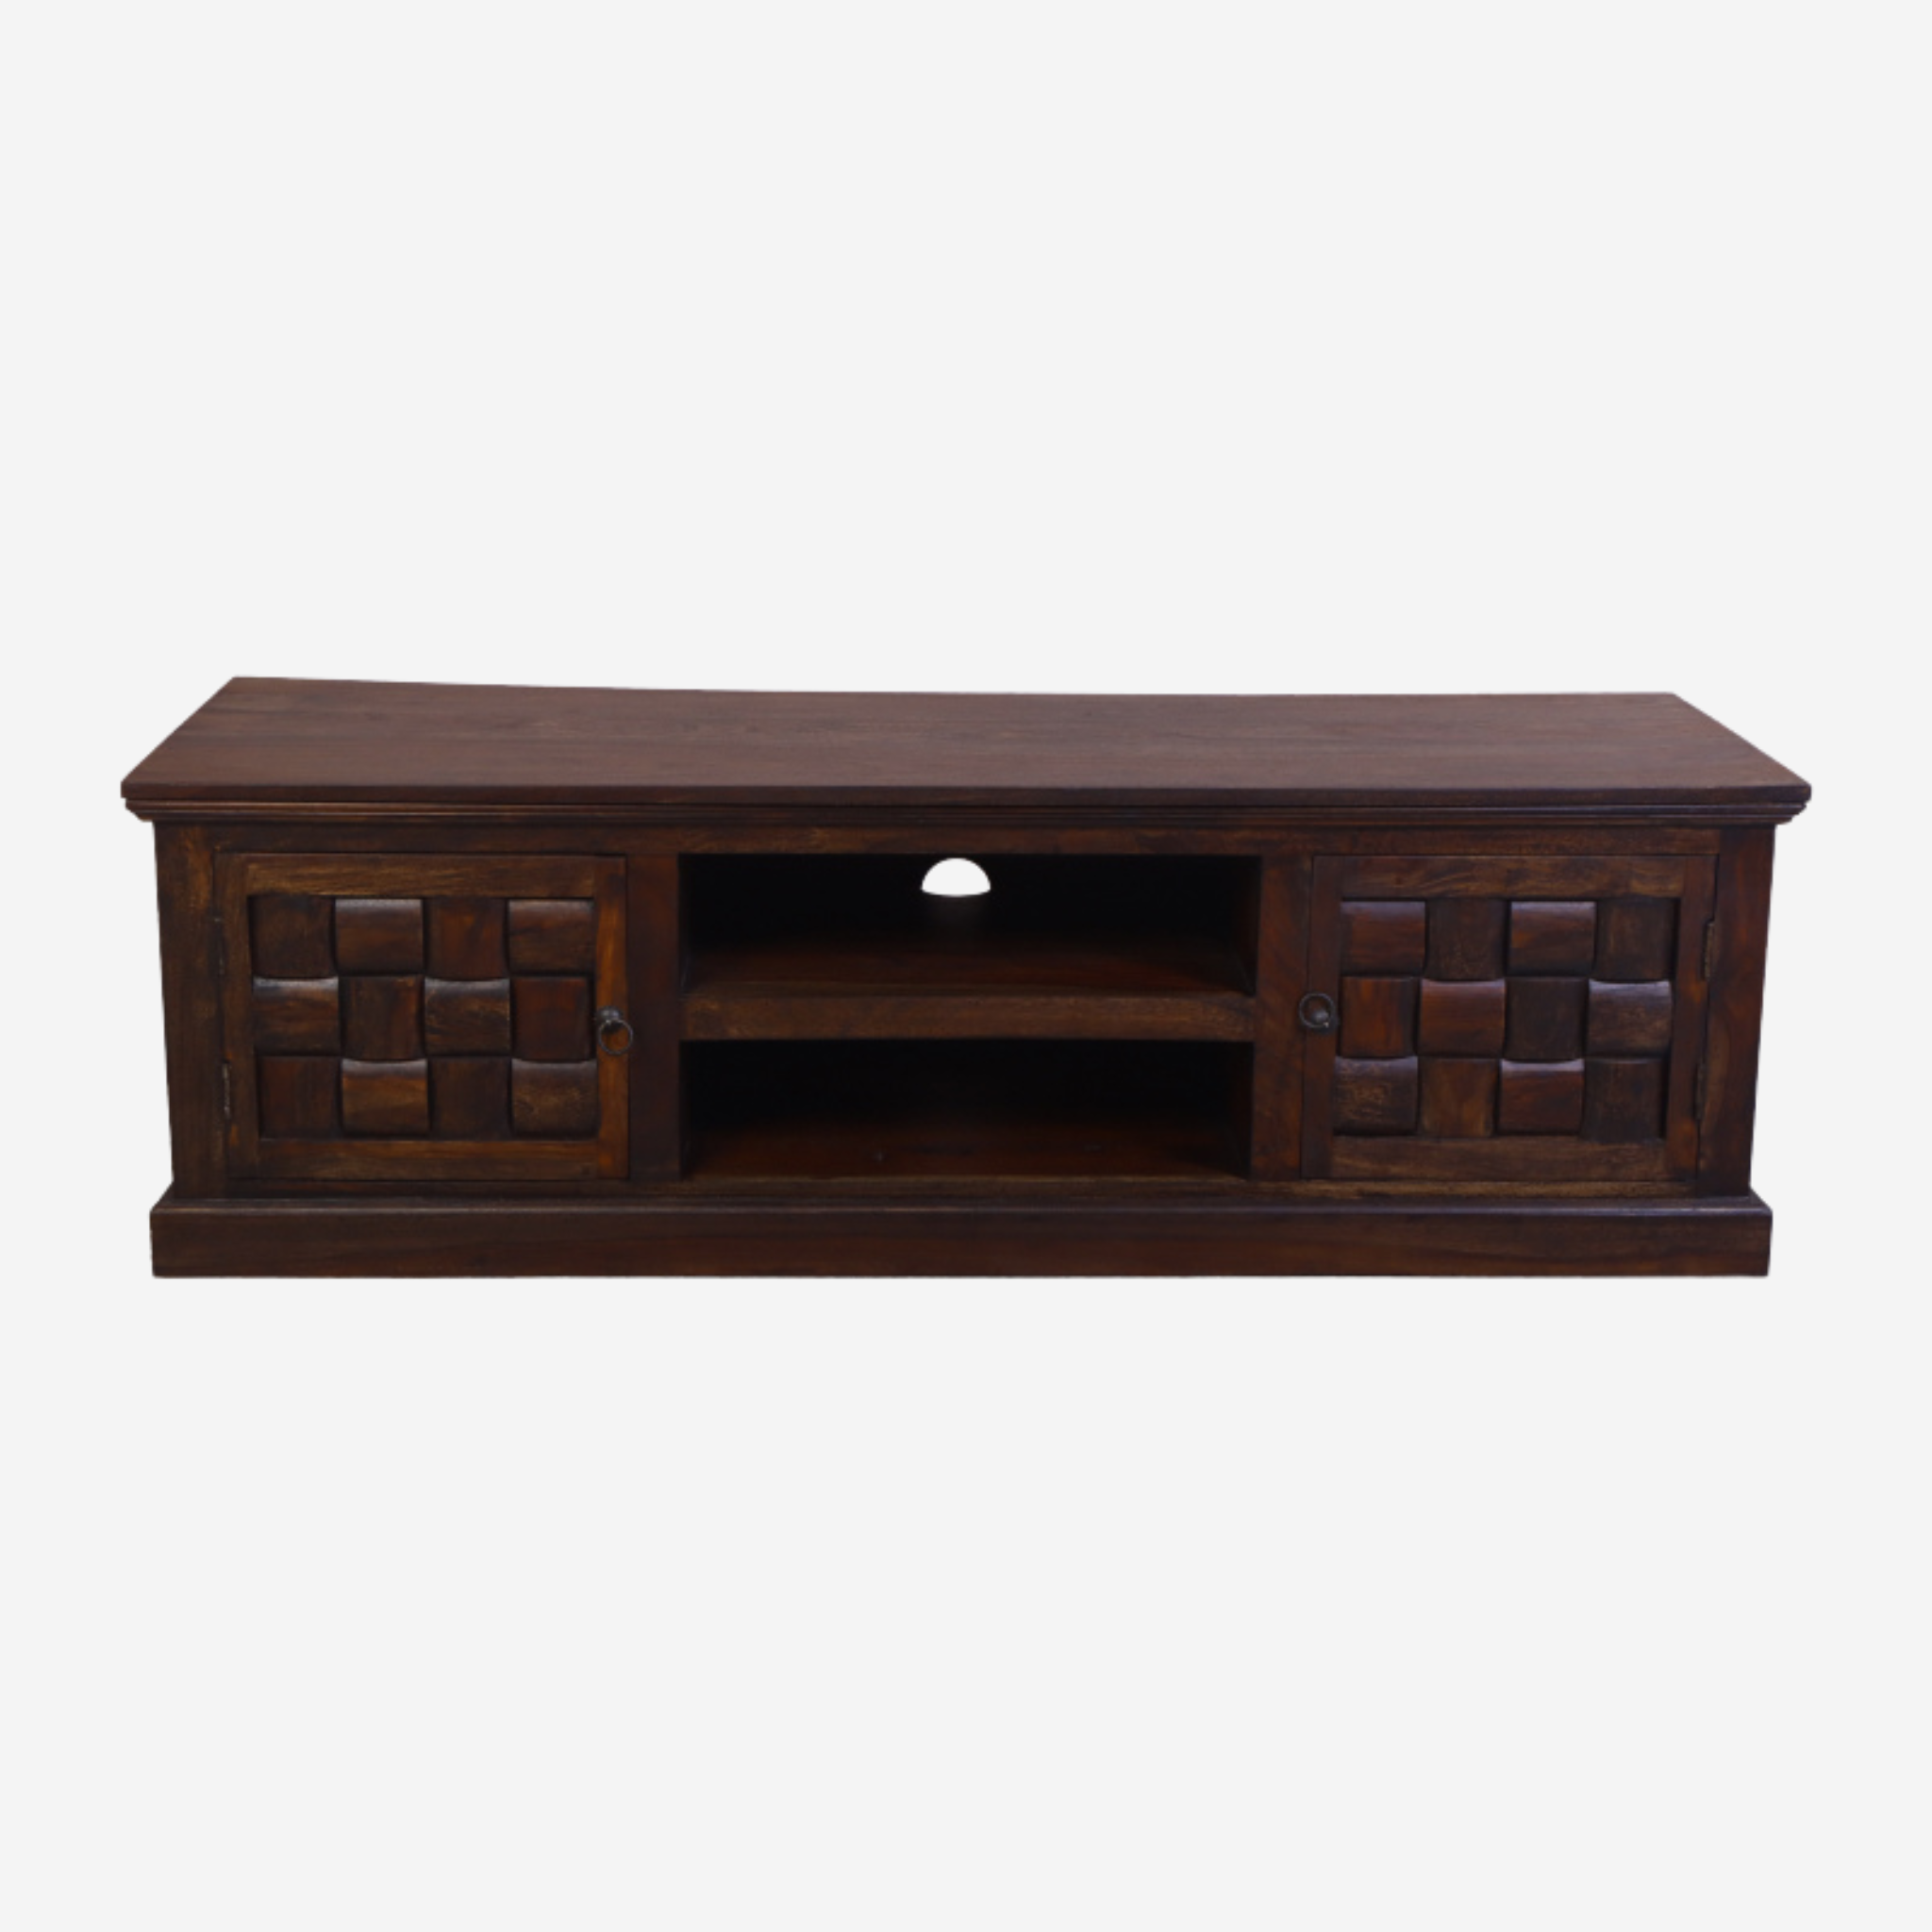 Nivaar TV Unit Free standing TV Unit with Cabinet Storage